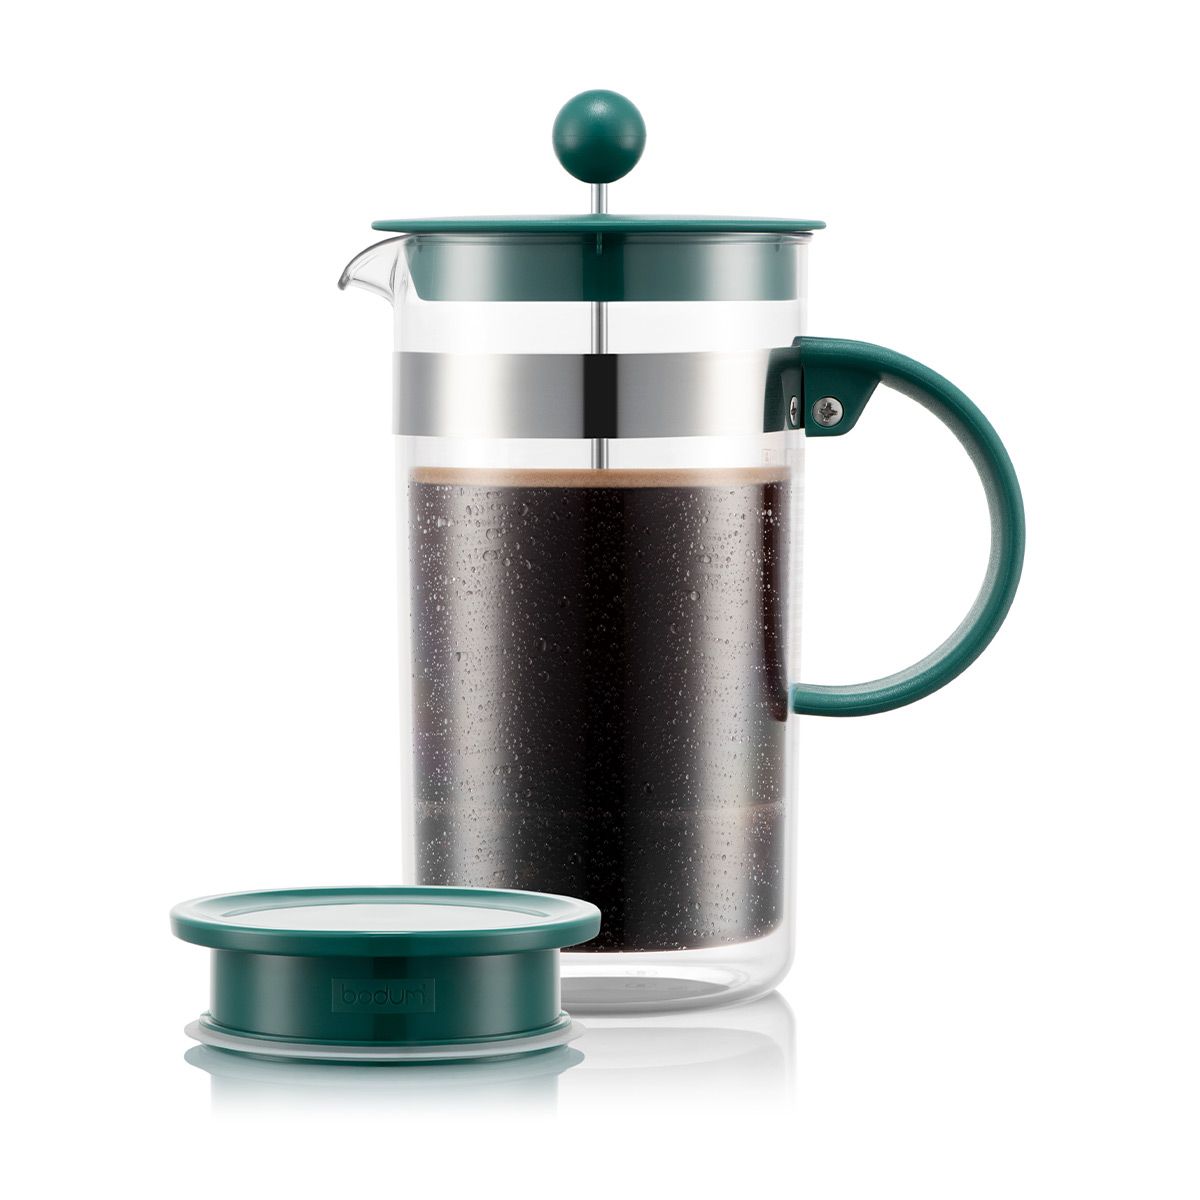 Coffee & a French Press (3 or 8 cup ) – 44 North Coffee